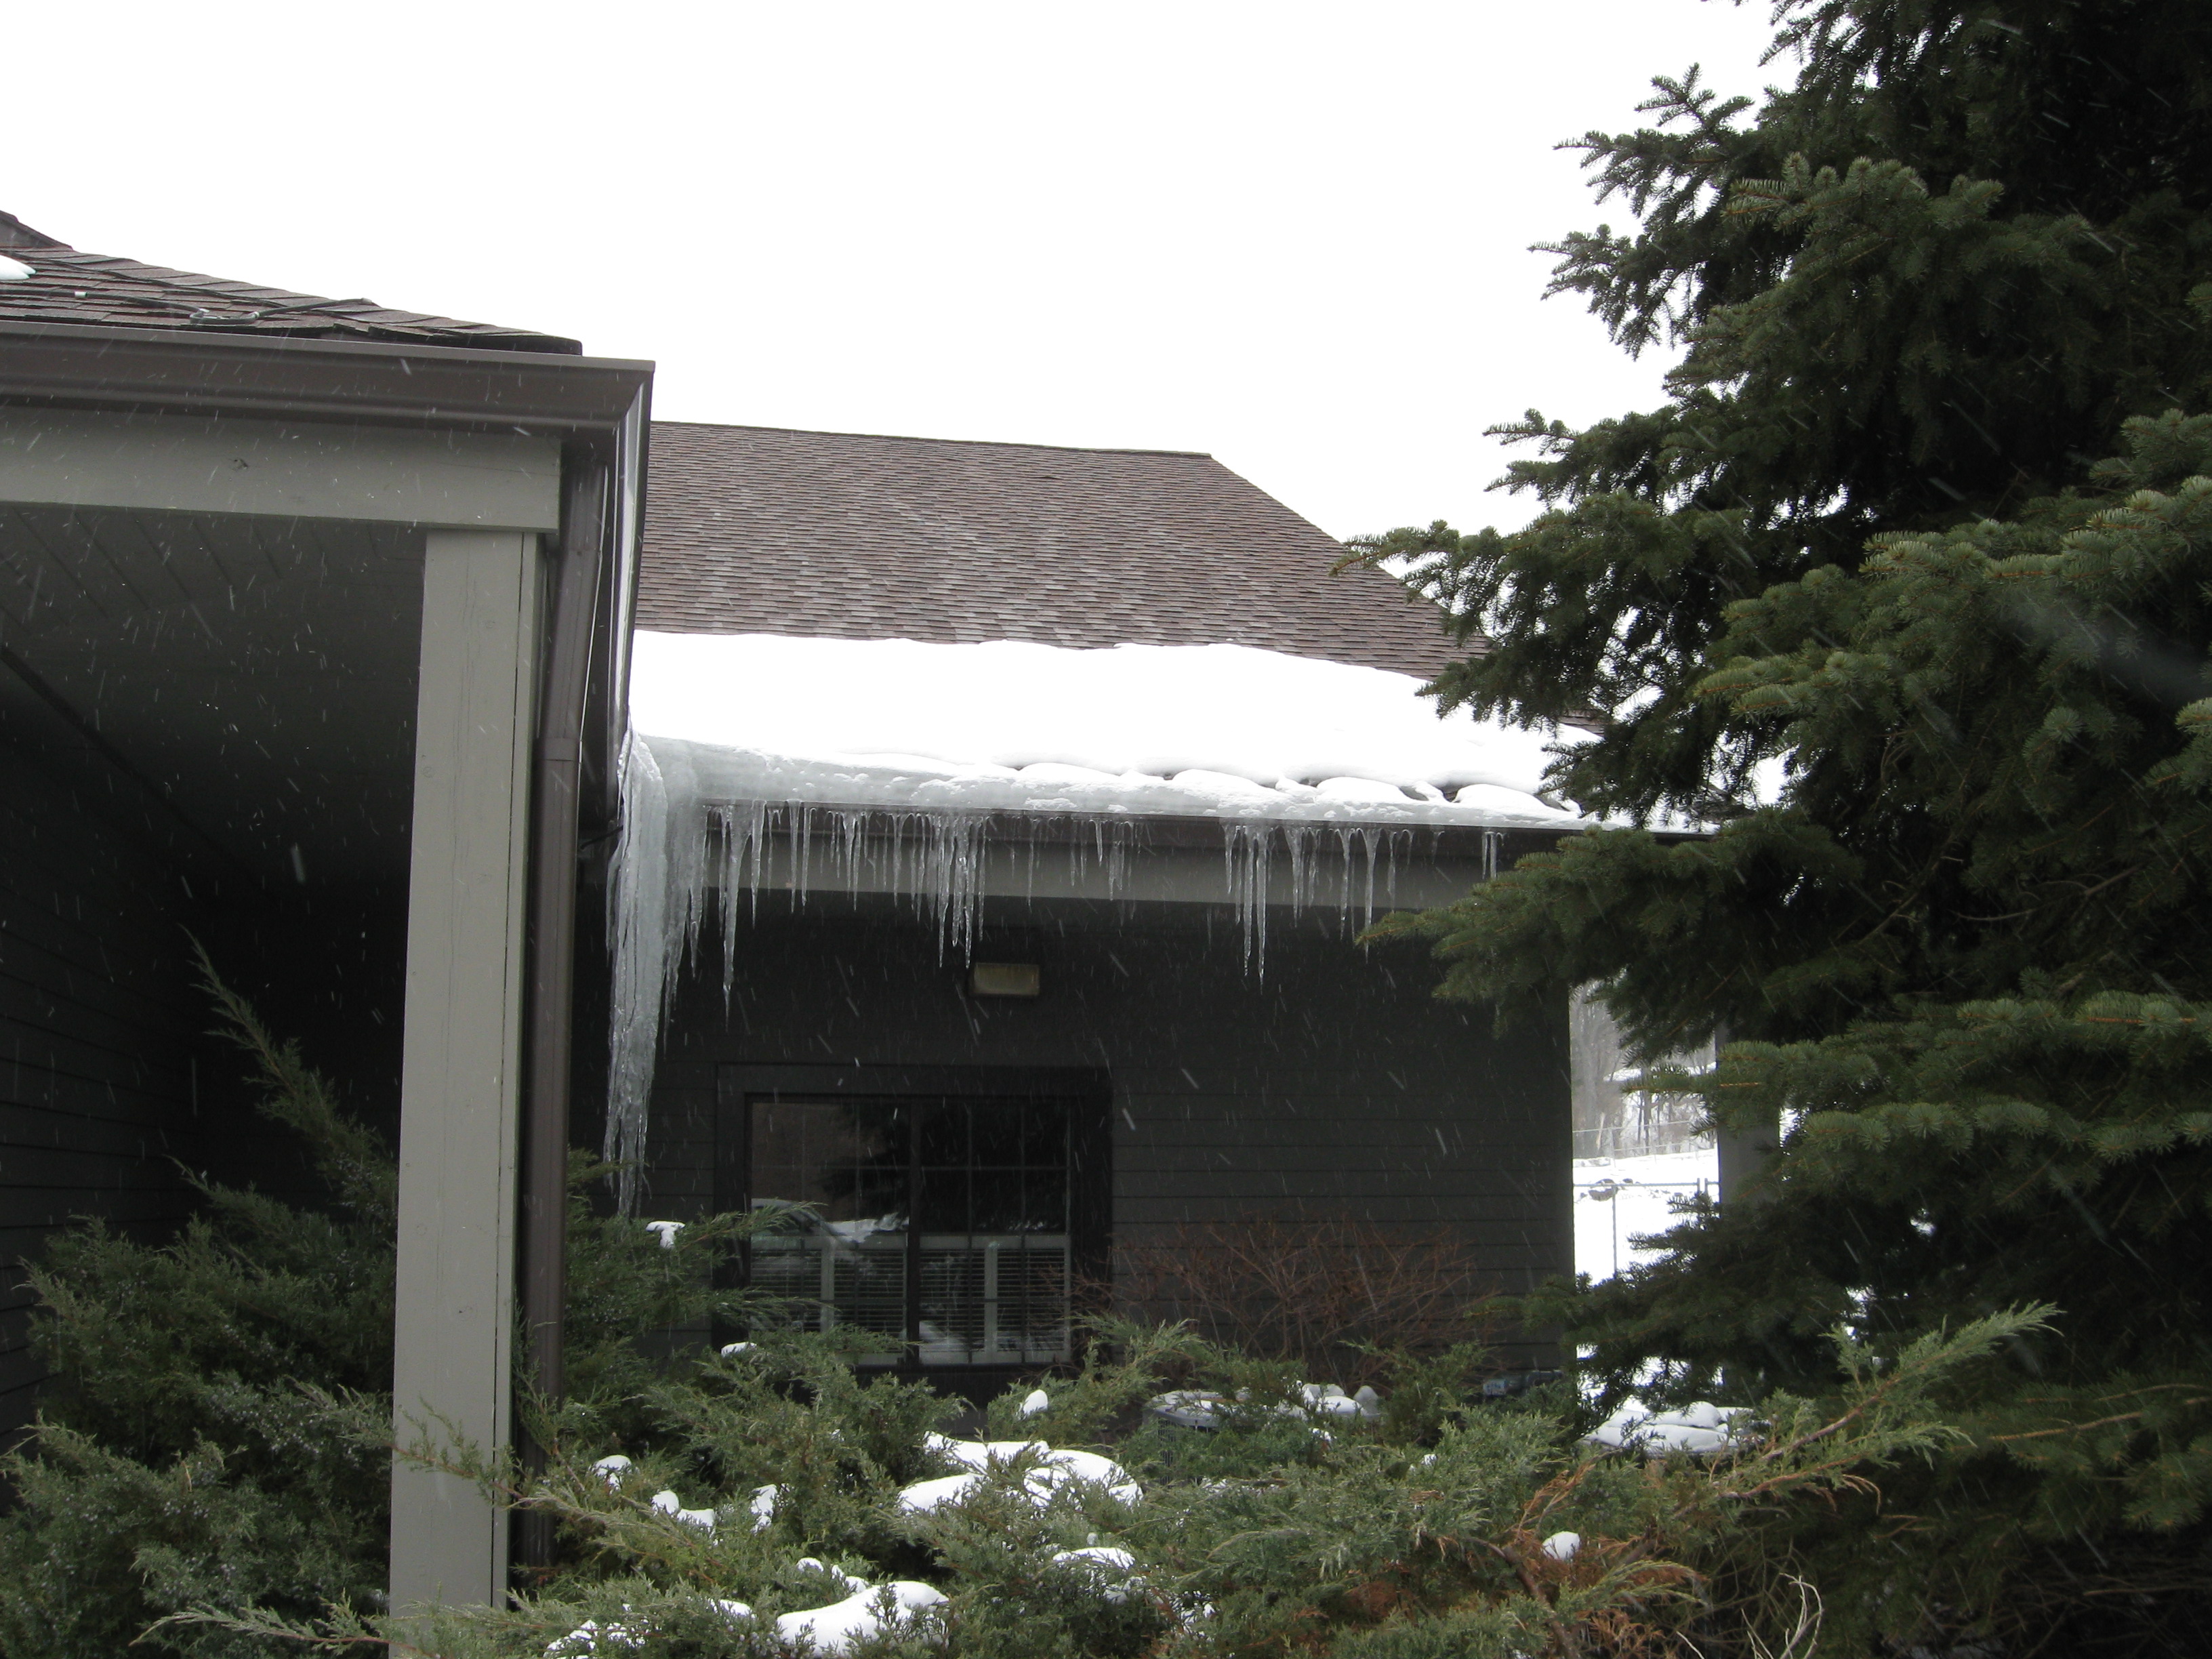 Zig Zag roof heat tape is not effective against roof ice dams